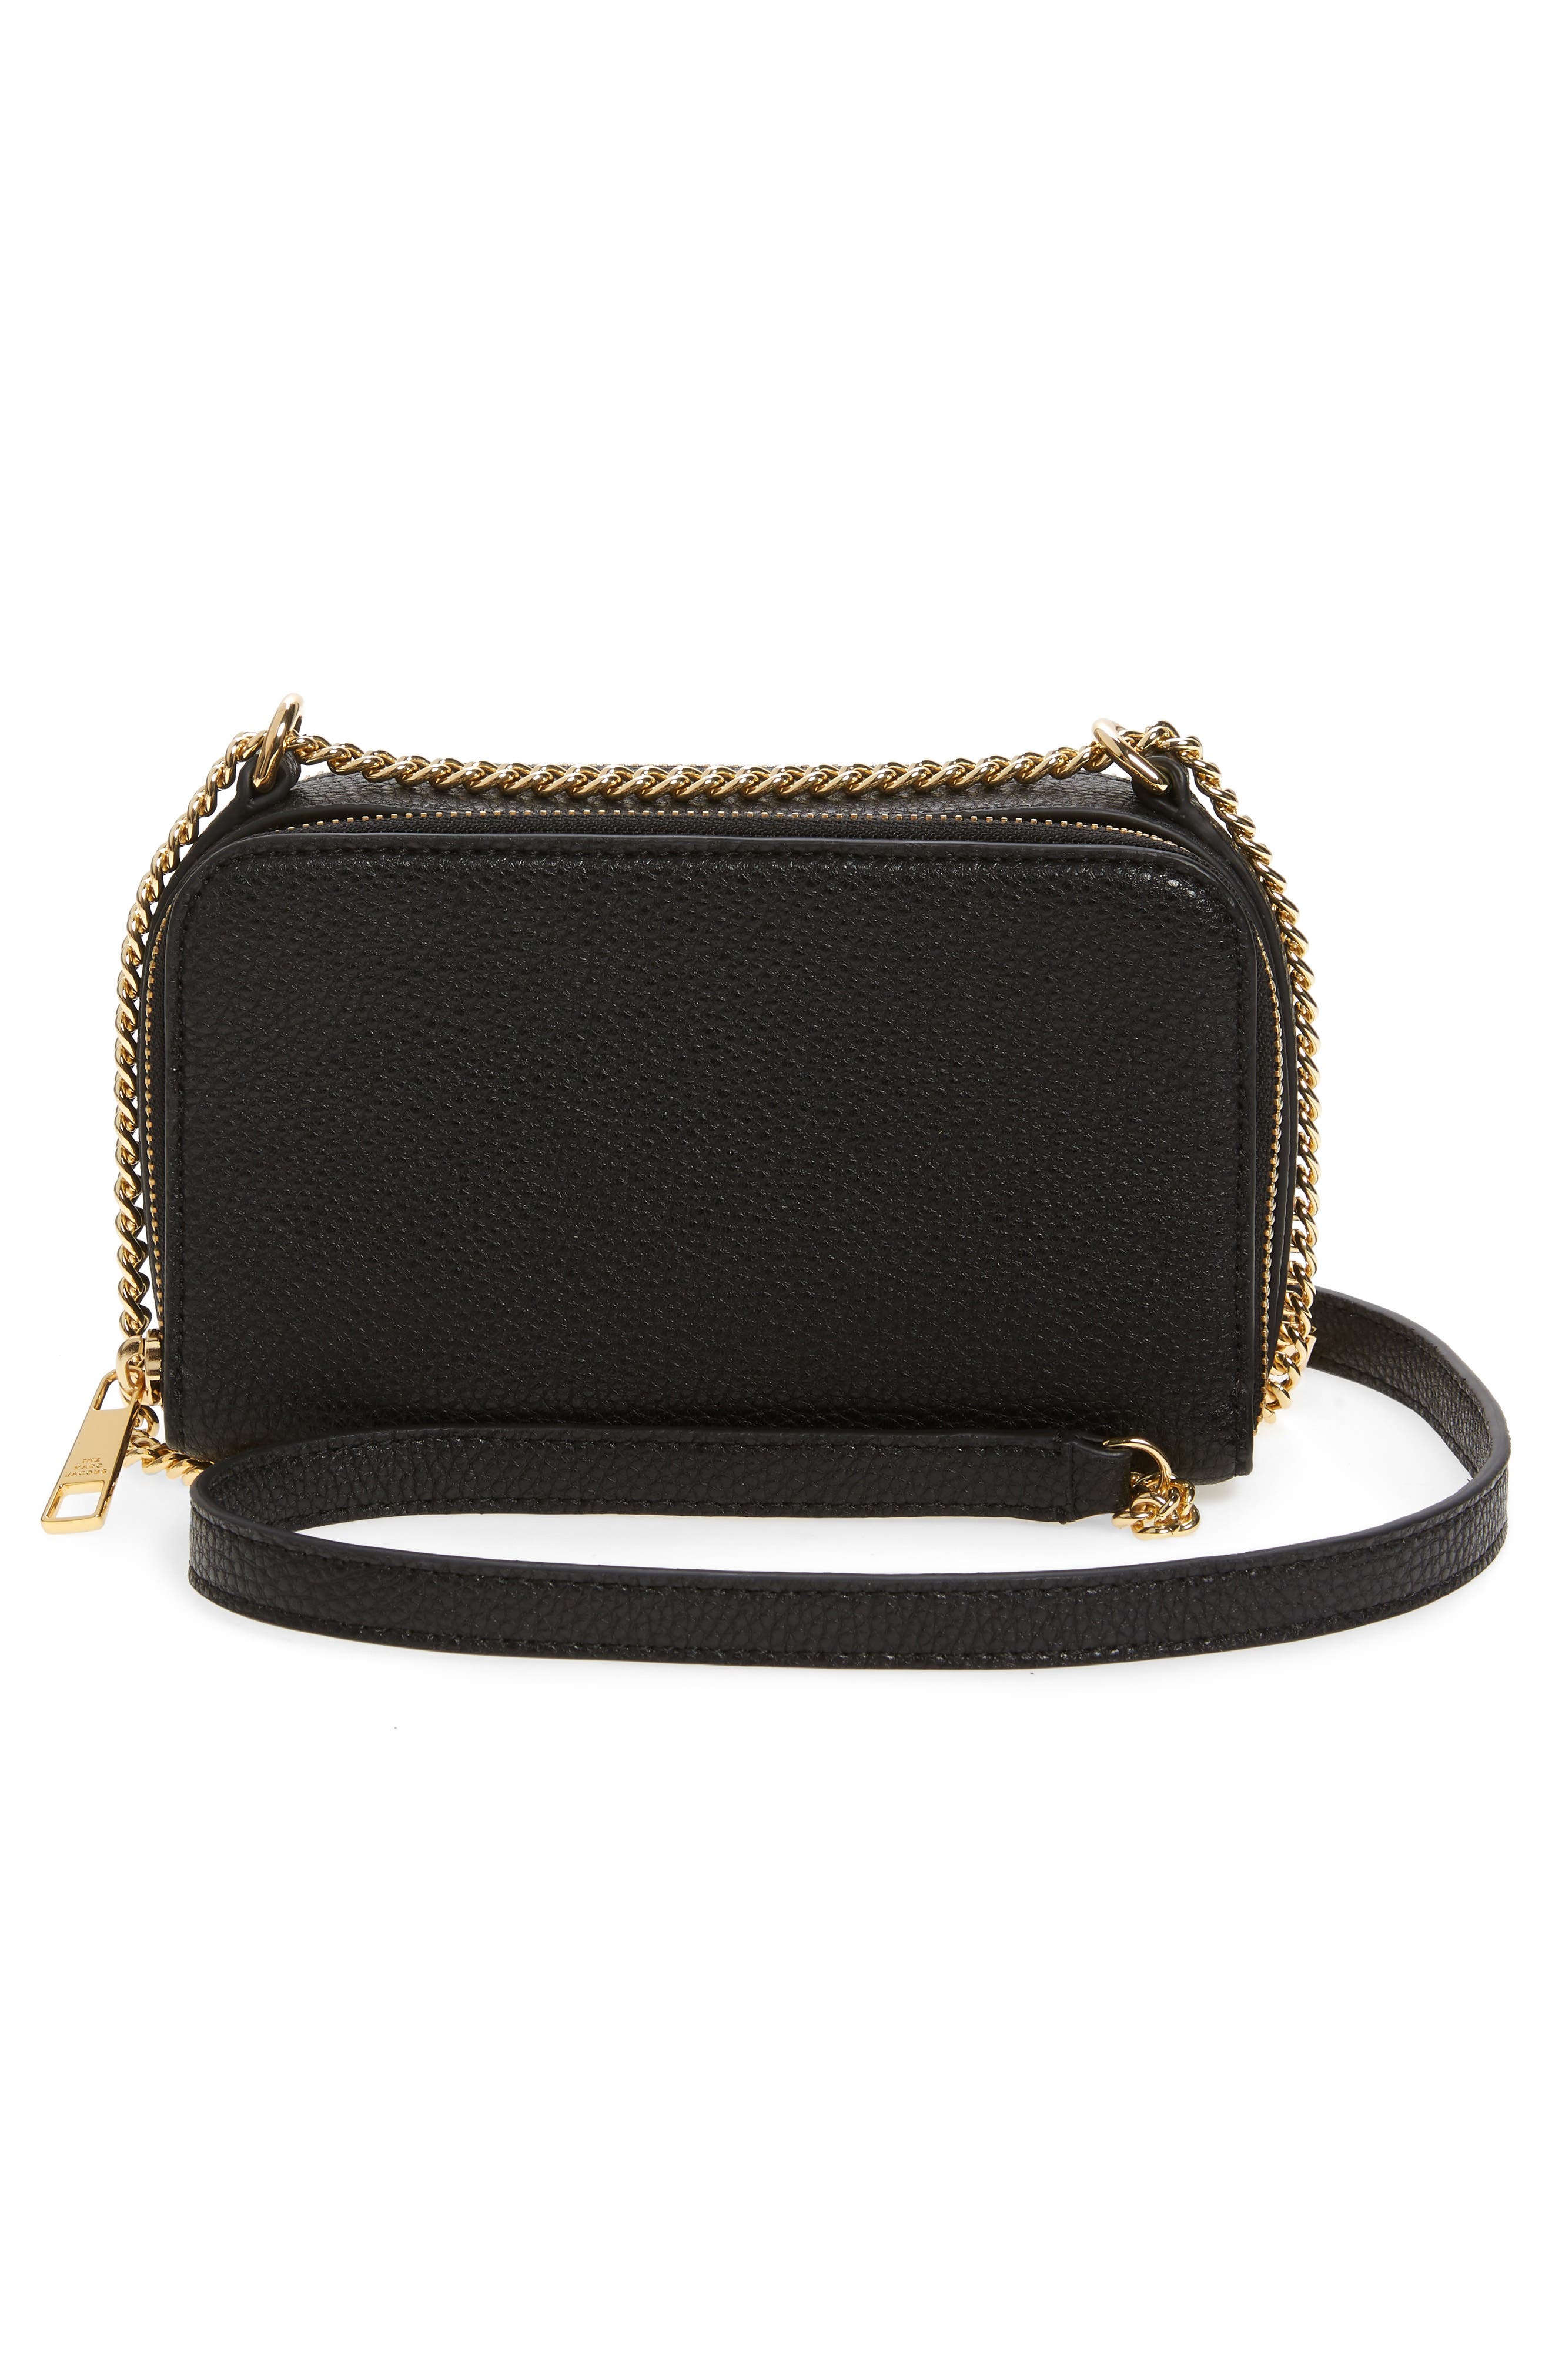 THE MARC JACOBS | The Everyday Crossbody | Nordstrom Rack